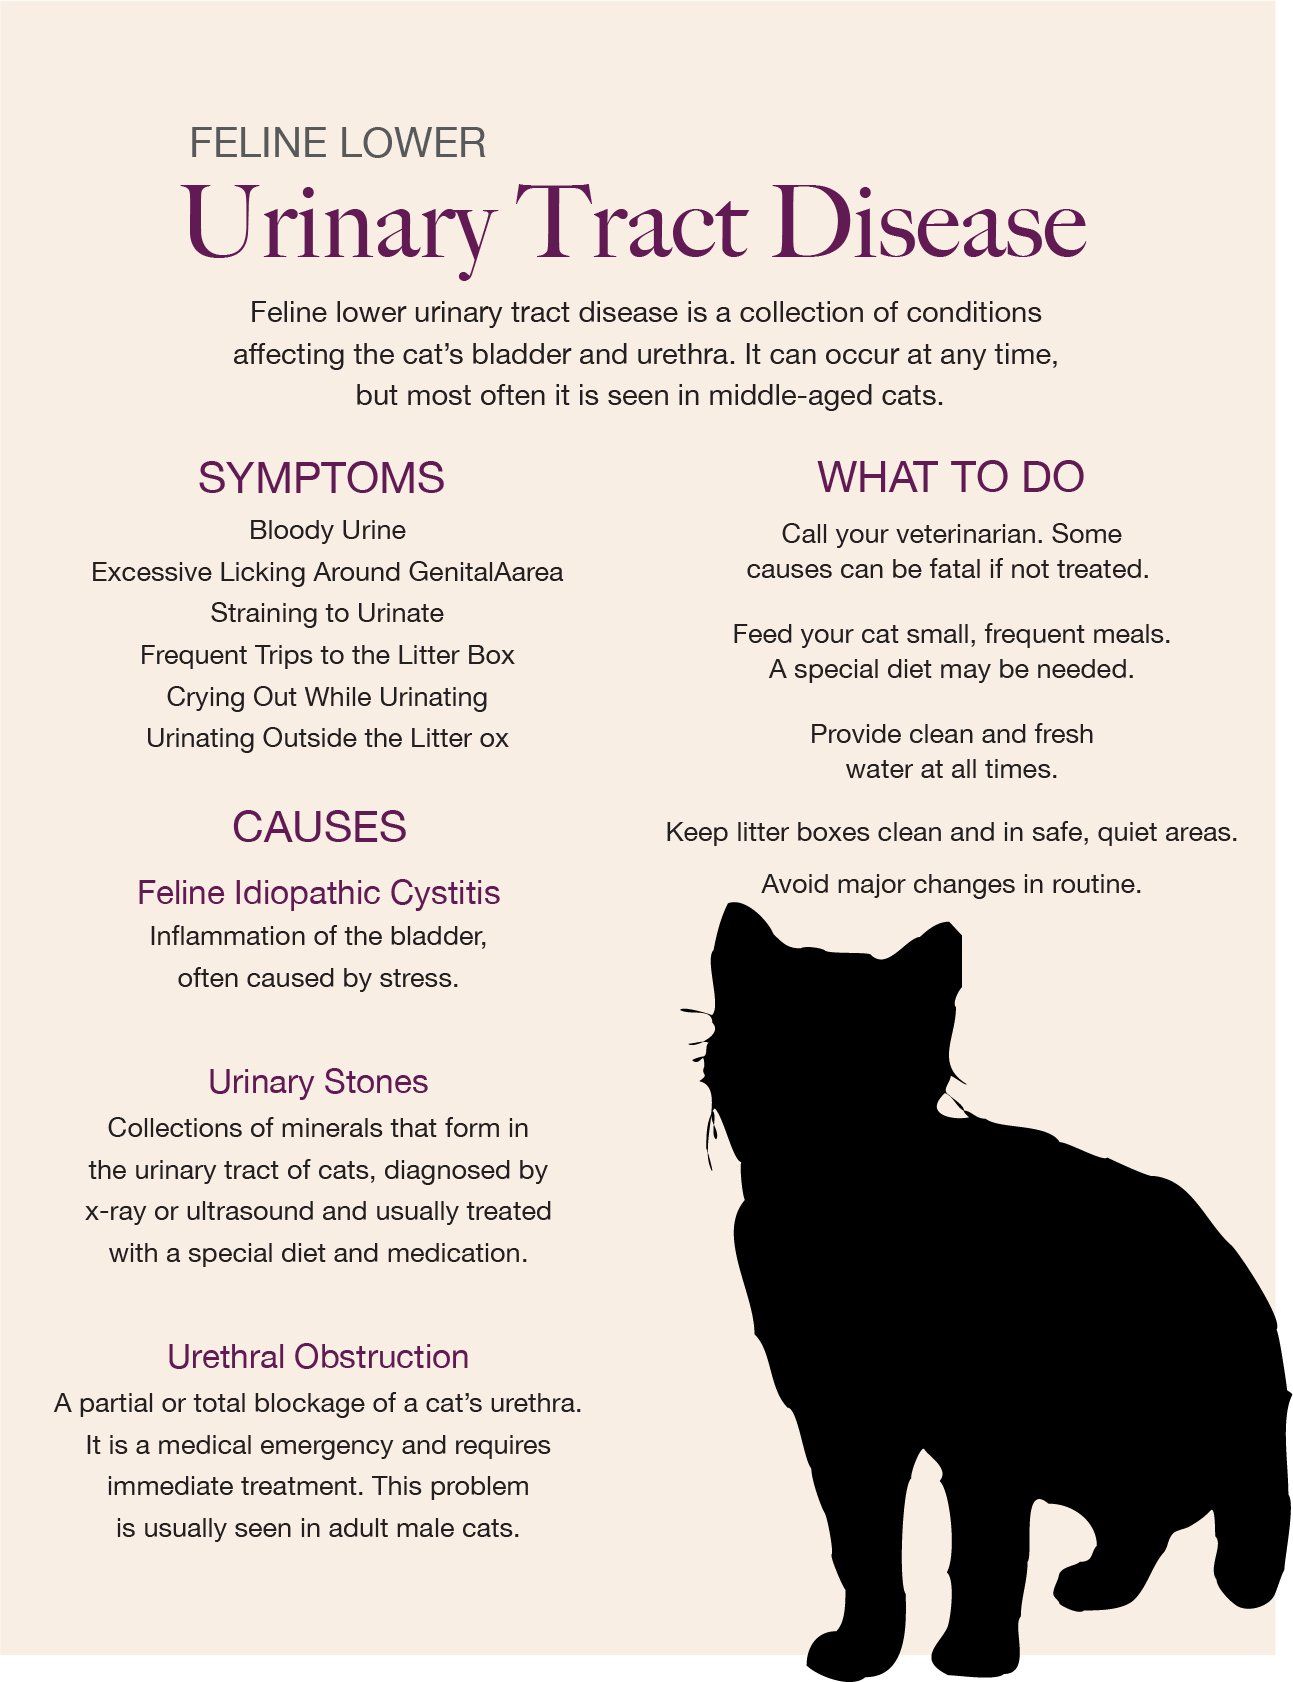 A black cat is standing next to a poster about urinary tract disease.